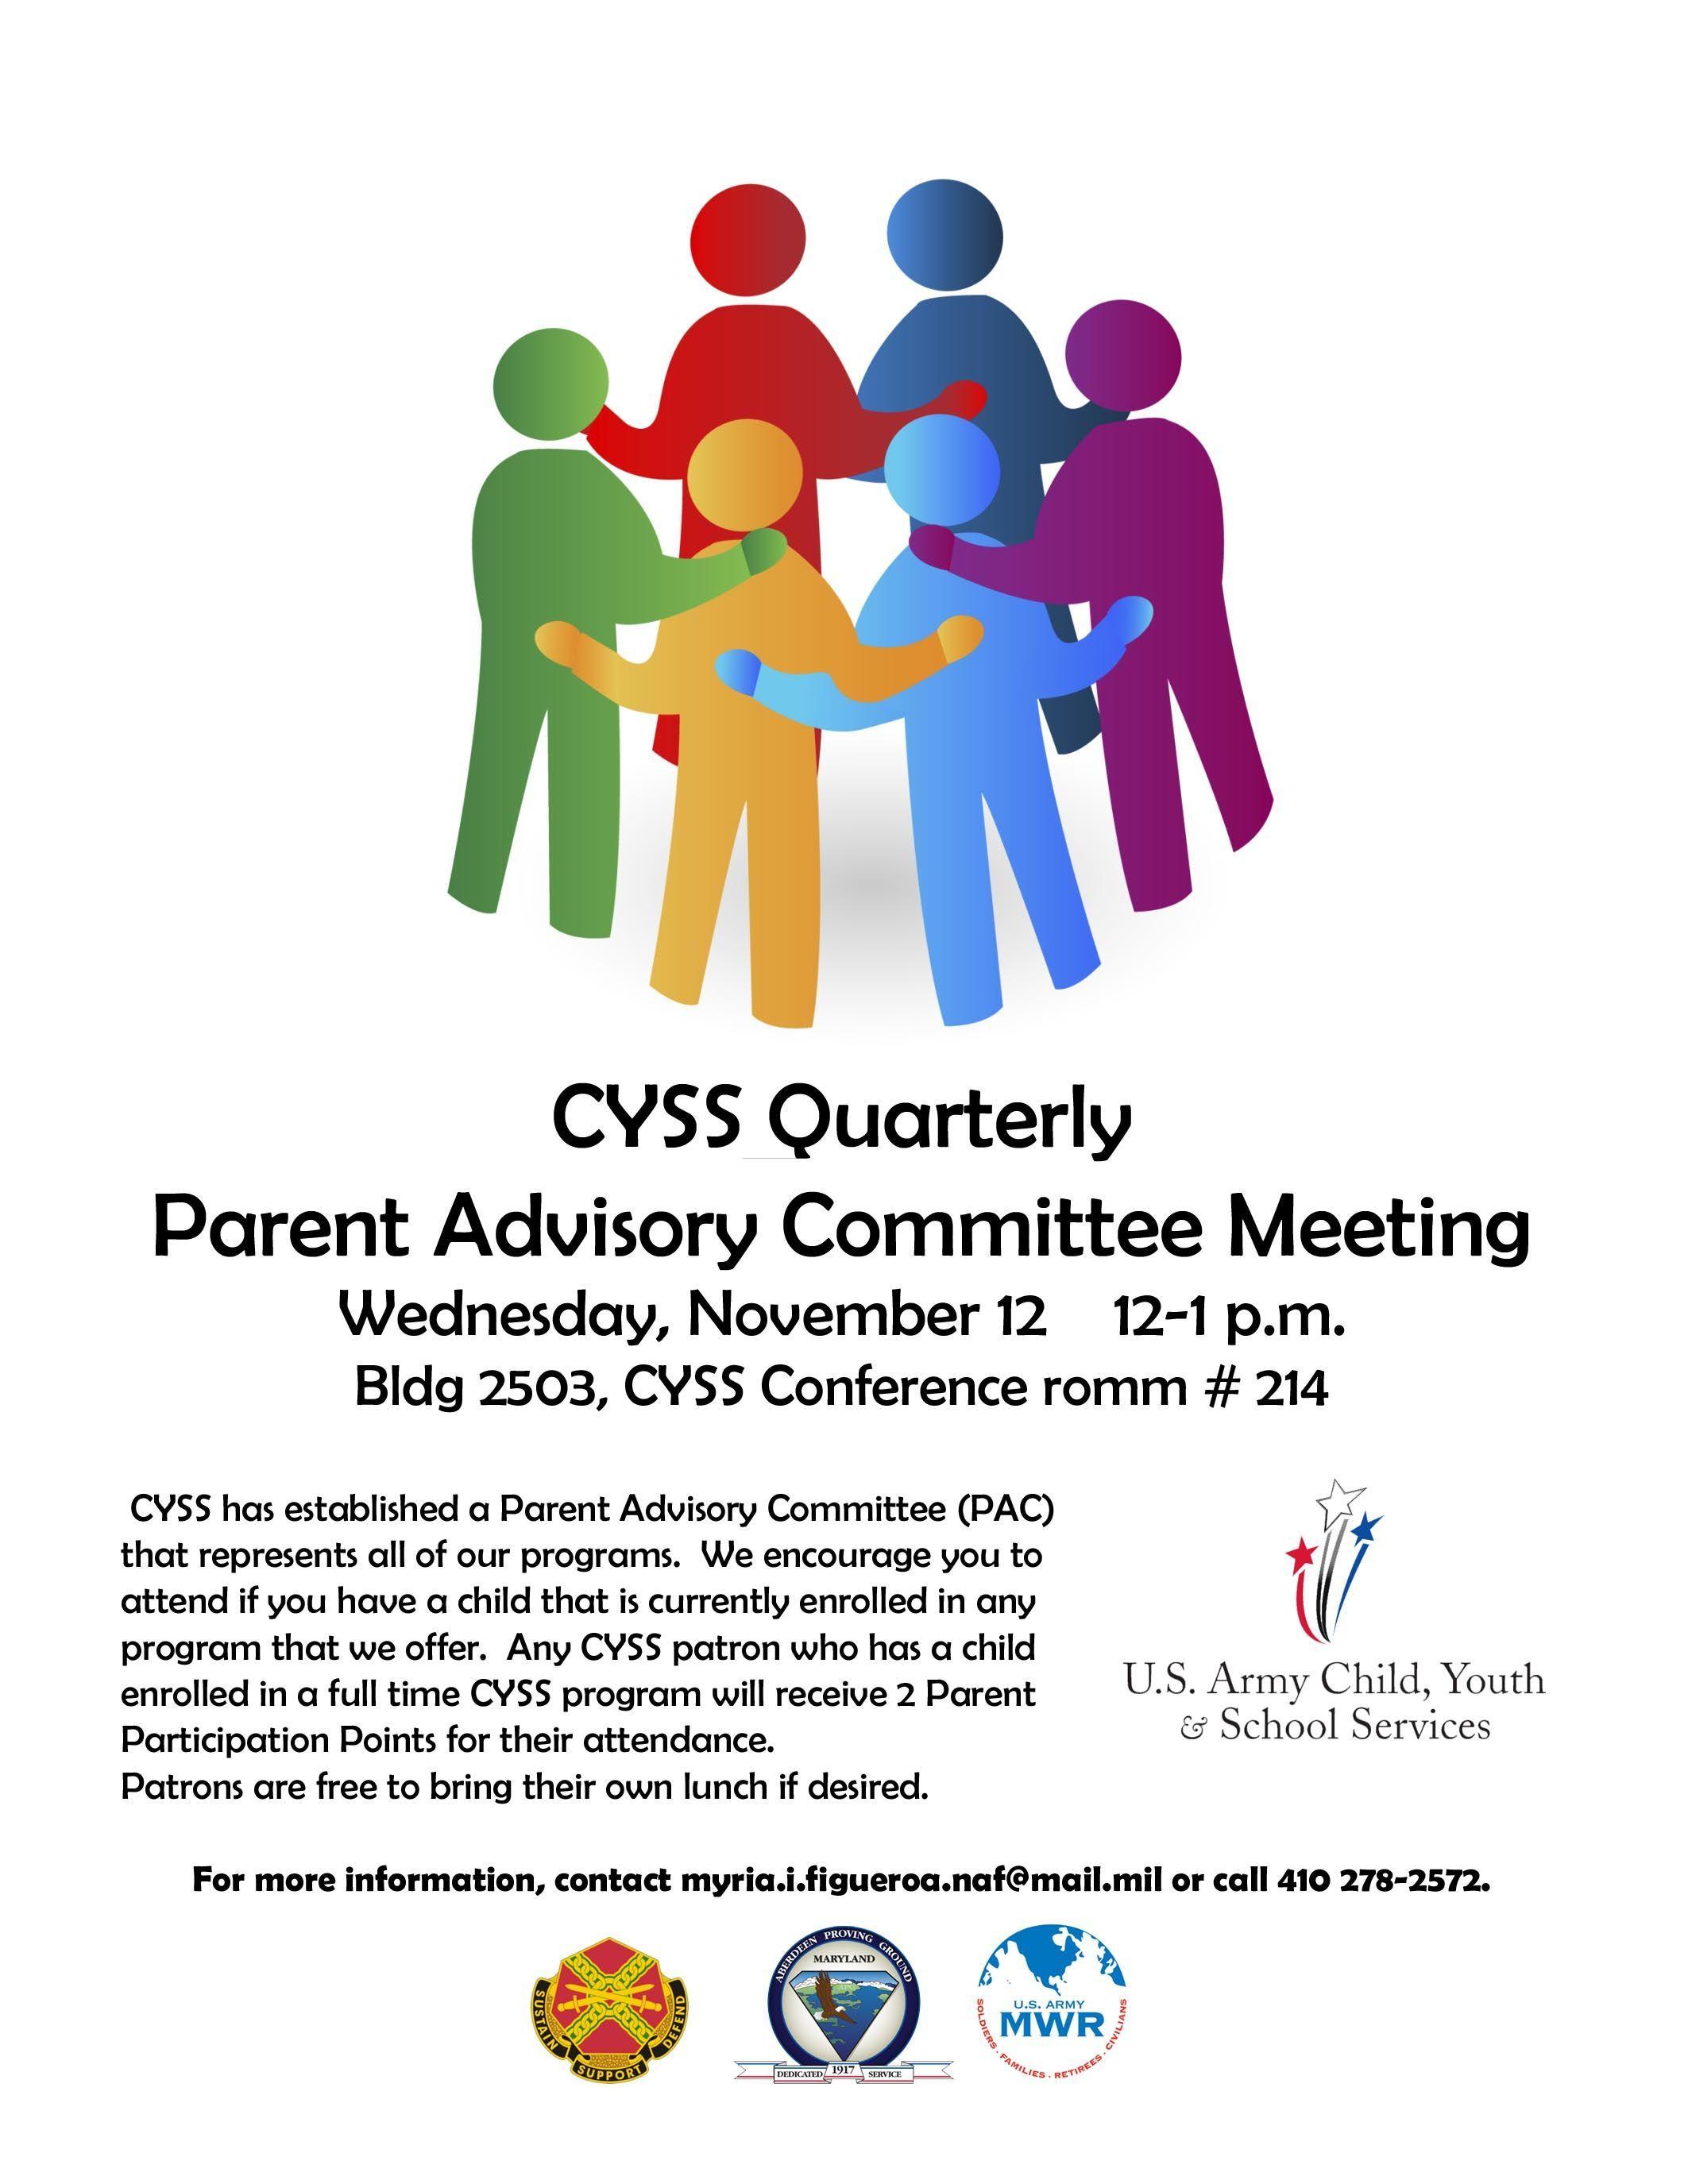 CYSS Logo - CYSS Parent Advisory Committee Meeting New date and time: Wed Nov 12